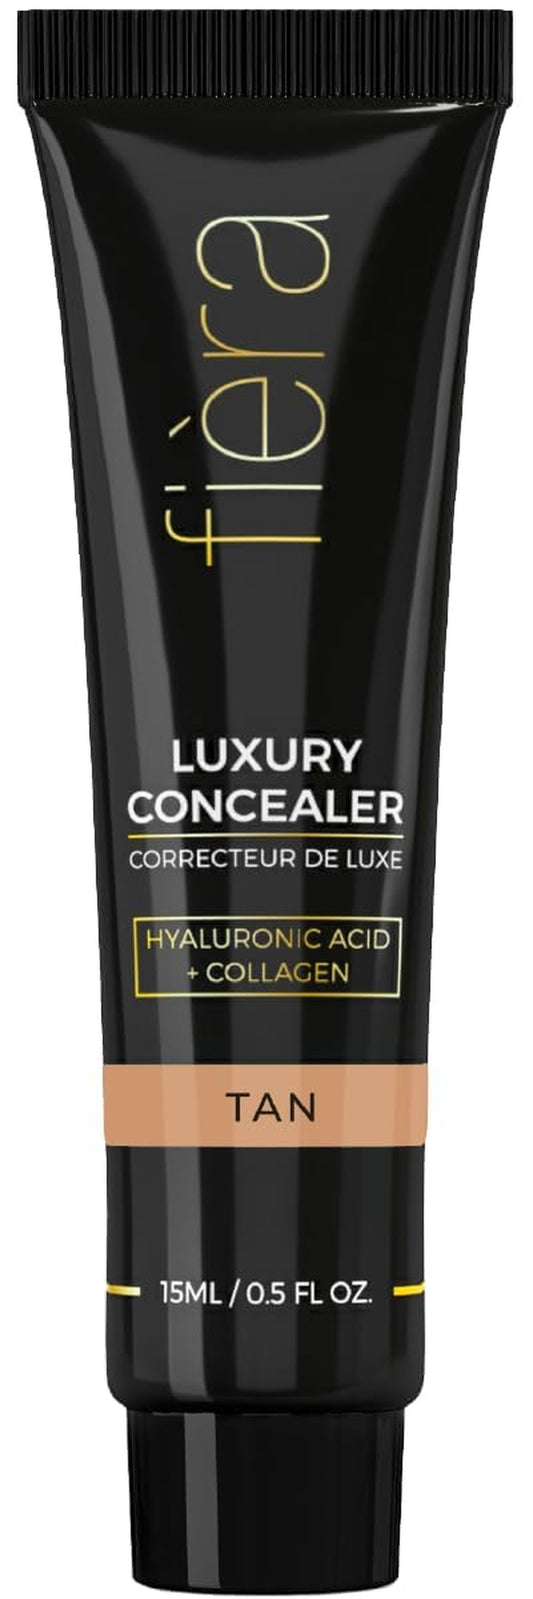 Luxury Concealer with Anti-Aging - All Day Coverage for Dark Circles, Fine Lines, Wrinkles & Spots - Tan, 0.5 Ounce